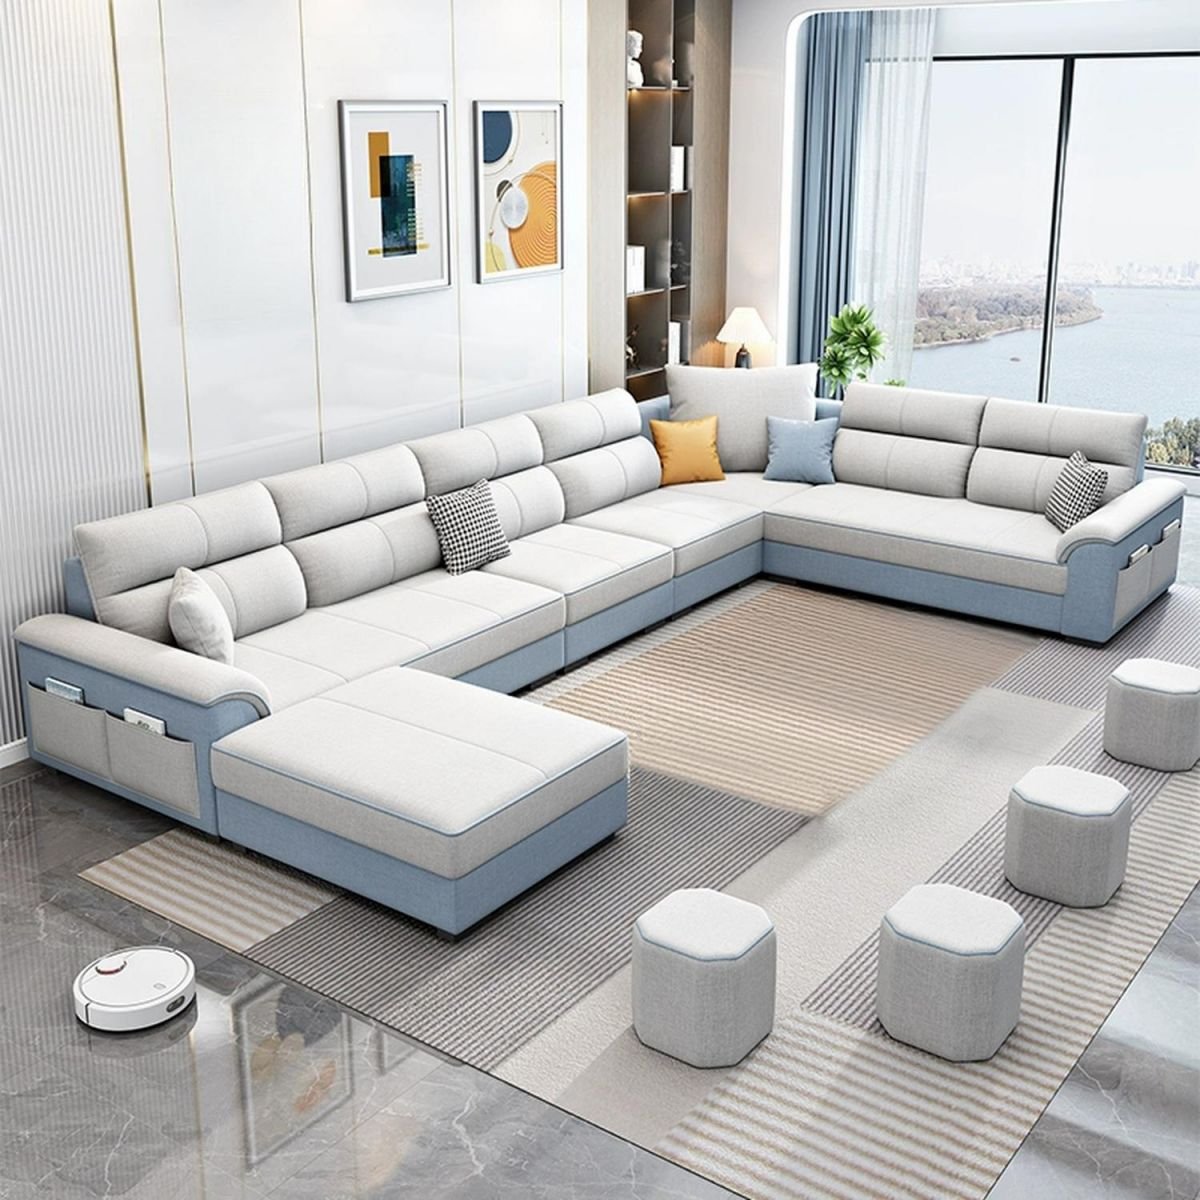 10ft Large Modern U-Shape Reversible Wood Sectional, Black Sofa Chaise with Pillow Top Arms - Cotton and Linen Beige/ Light Blue